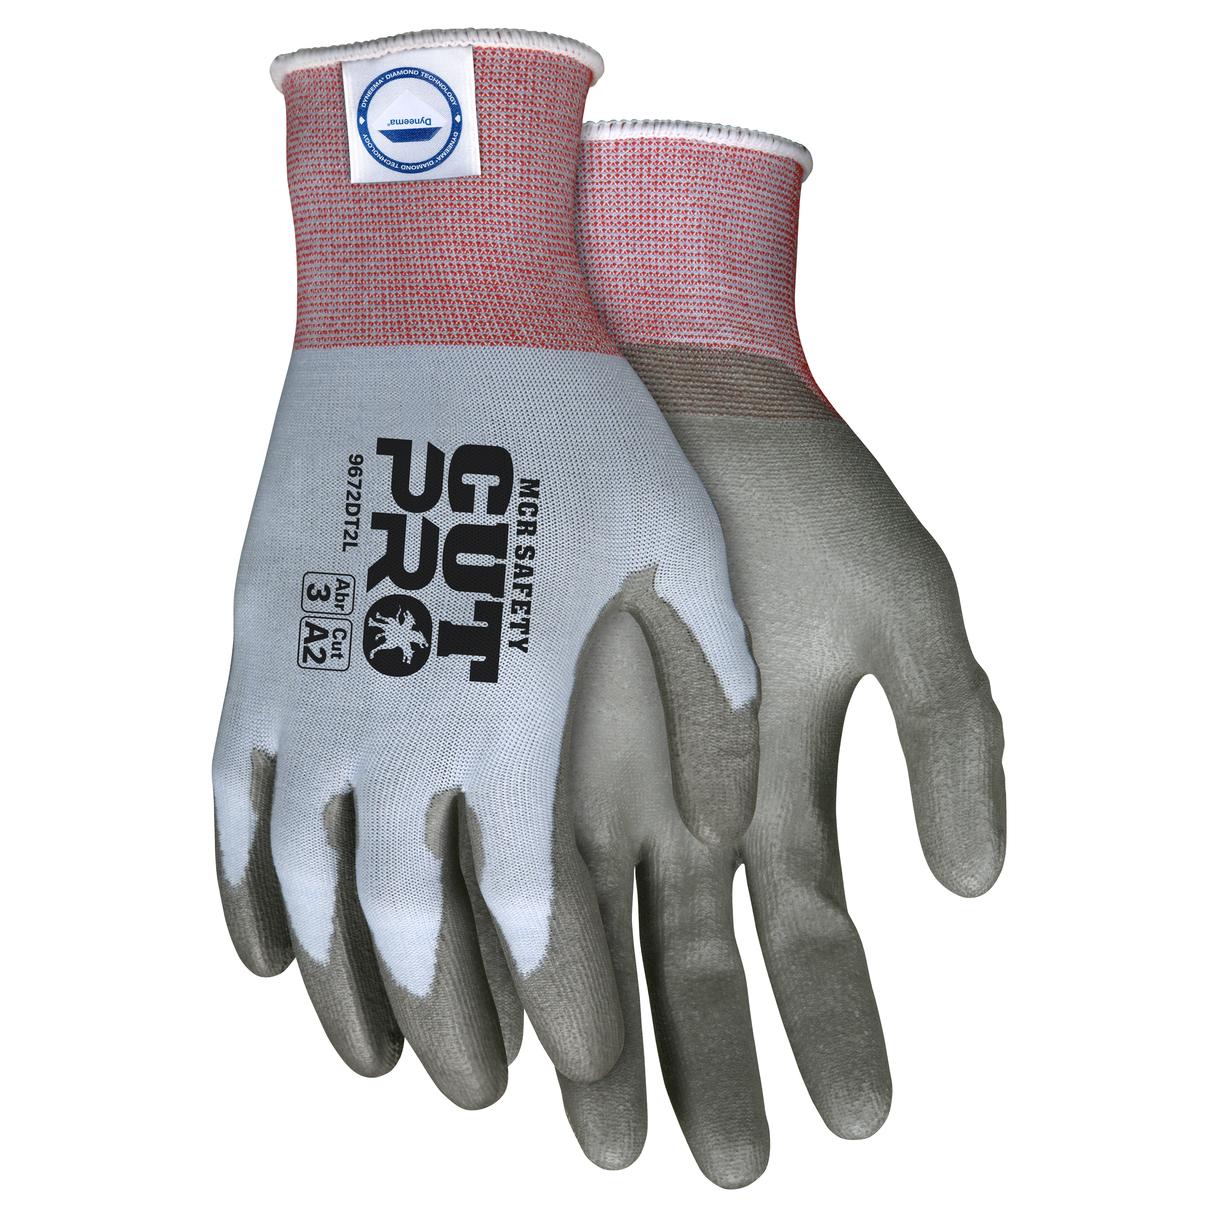 MCR Safety Ninja N9690FCO/N9690FC Fully Coated HPT Ice Insulated ANSI Cut  Level A3 Gloves